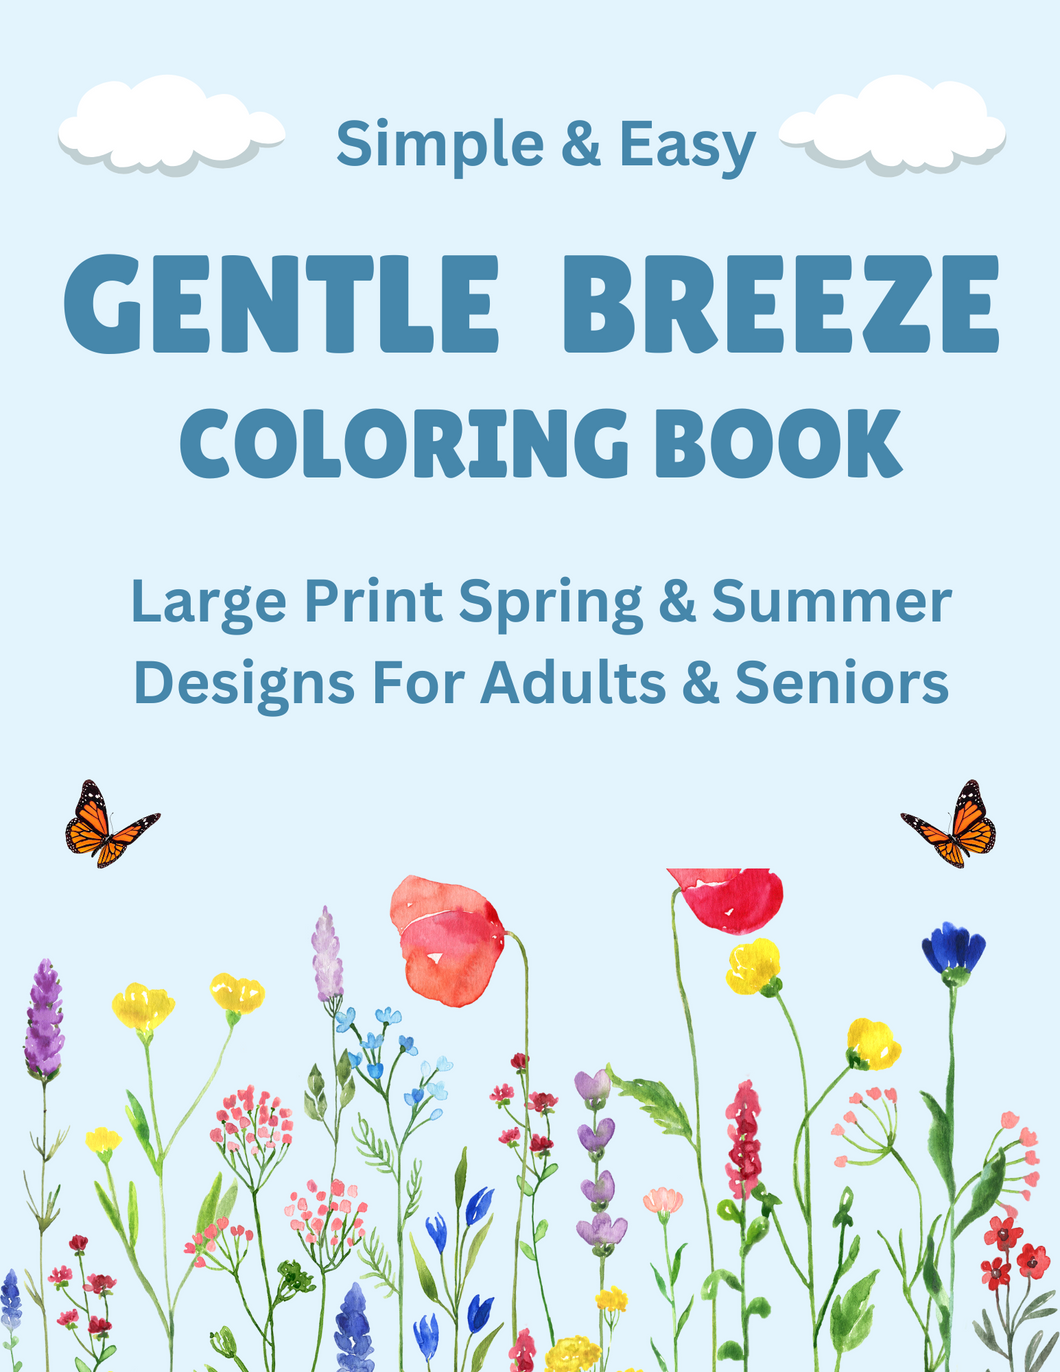 Gentle Breeze Large Print Coloring Book of Spring and Summer Designs